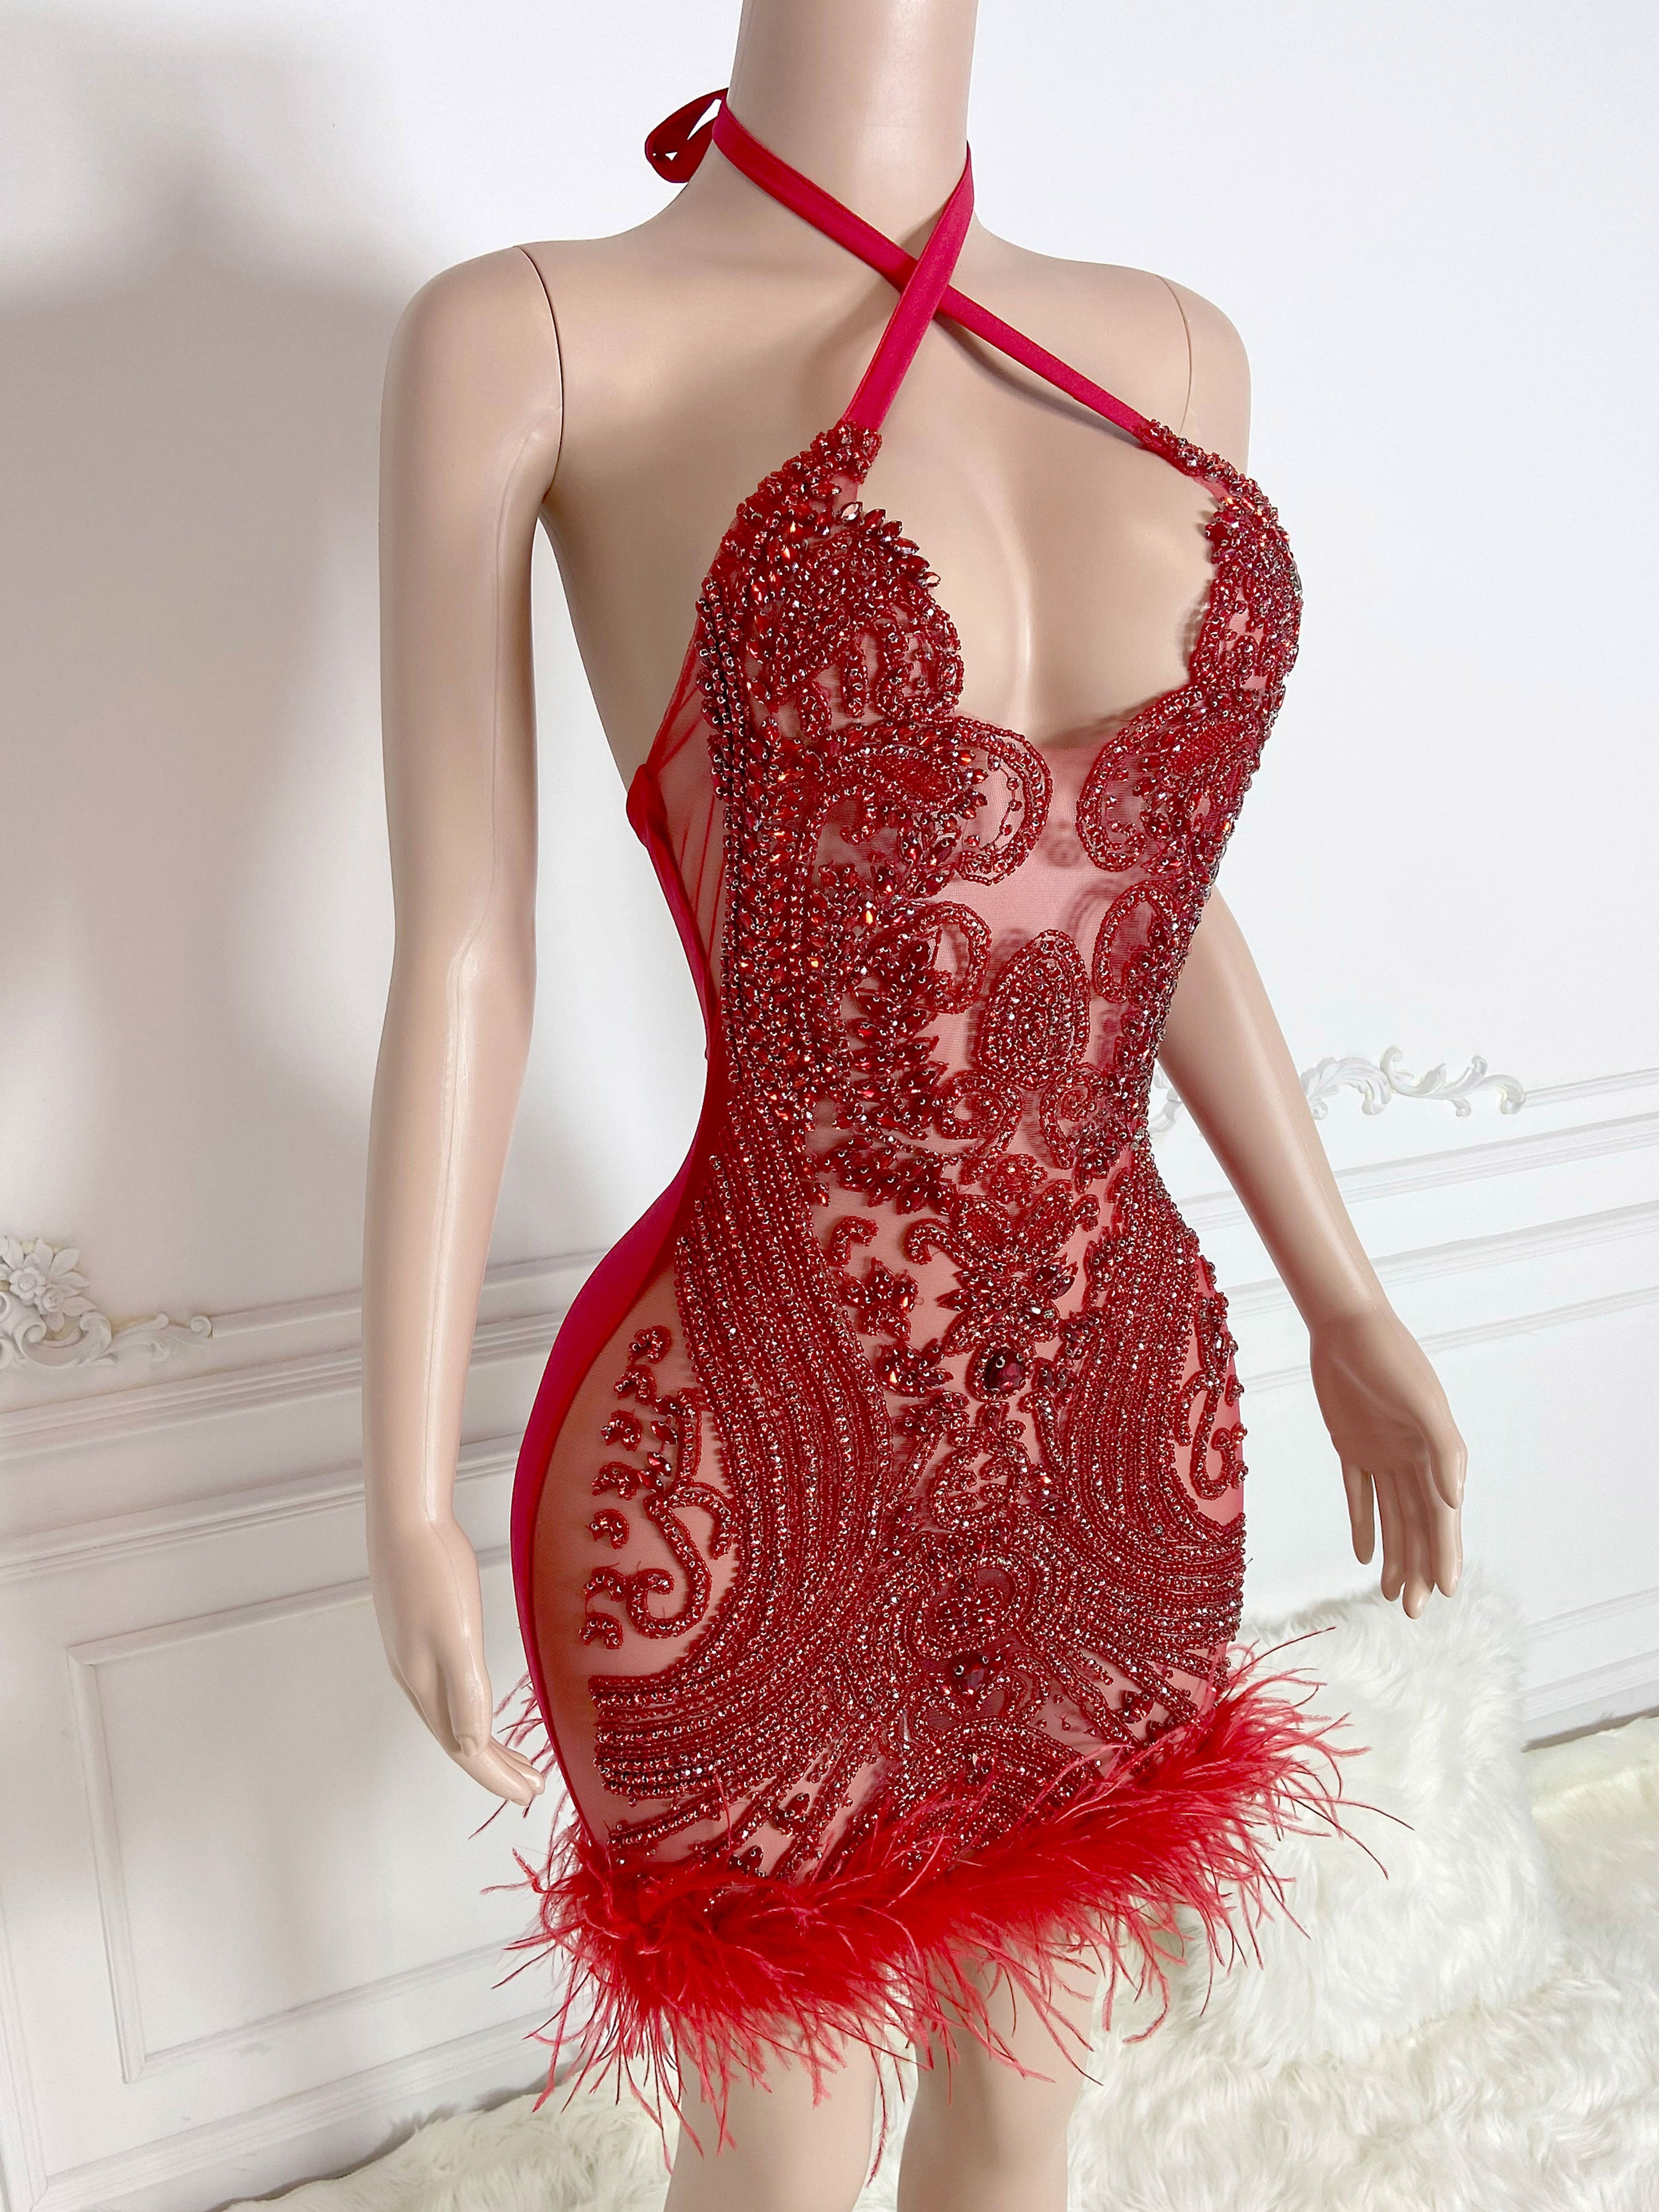 Fiery Red Feathered Halter Dress